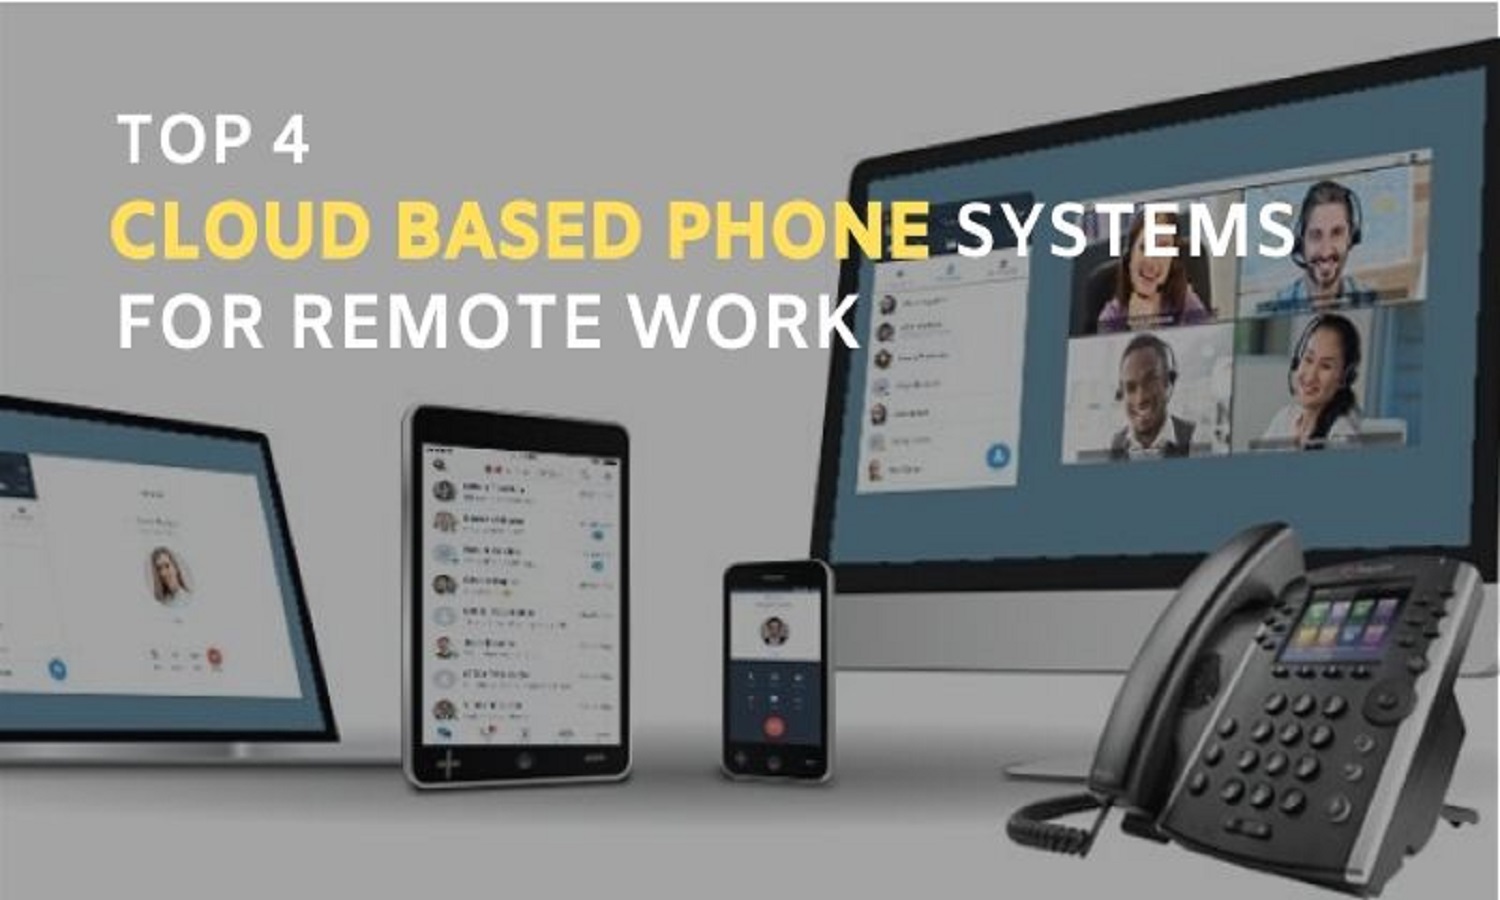 Top 4 Cloud-Based Phone Systems for Remote Work